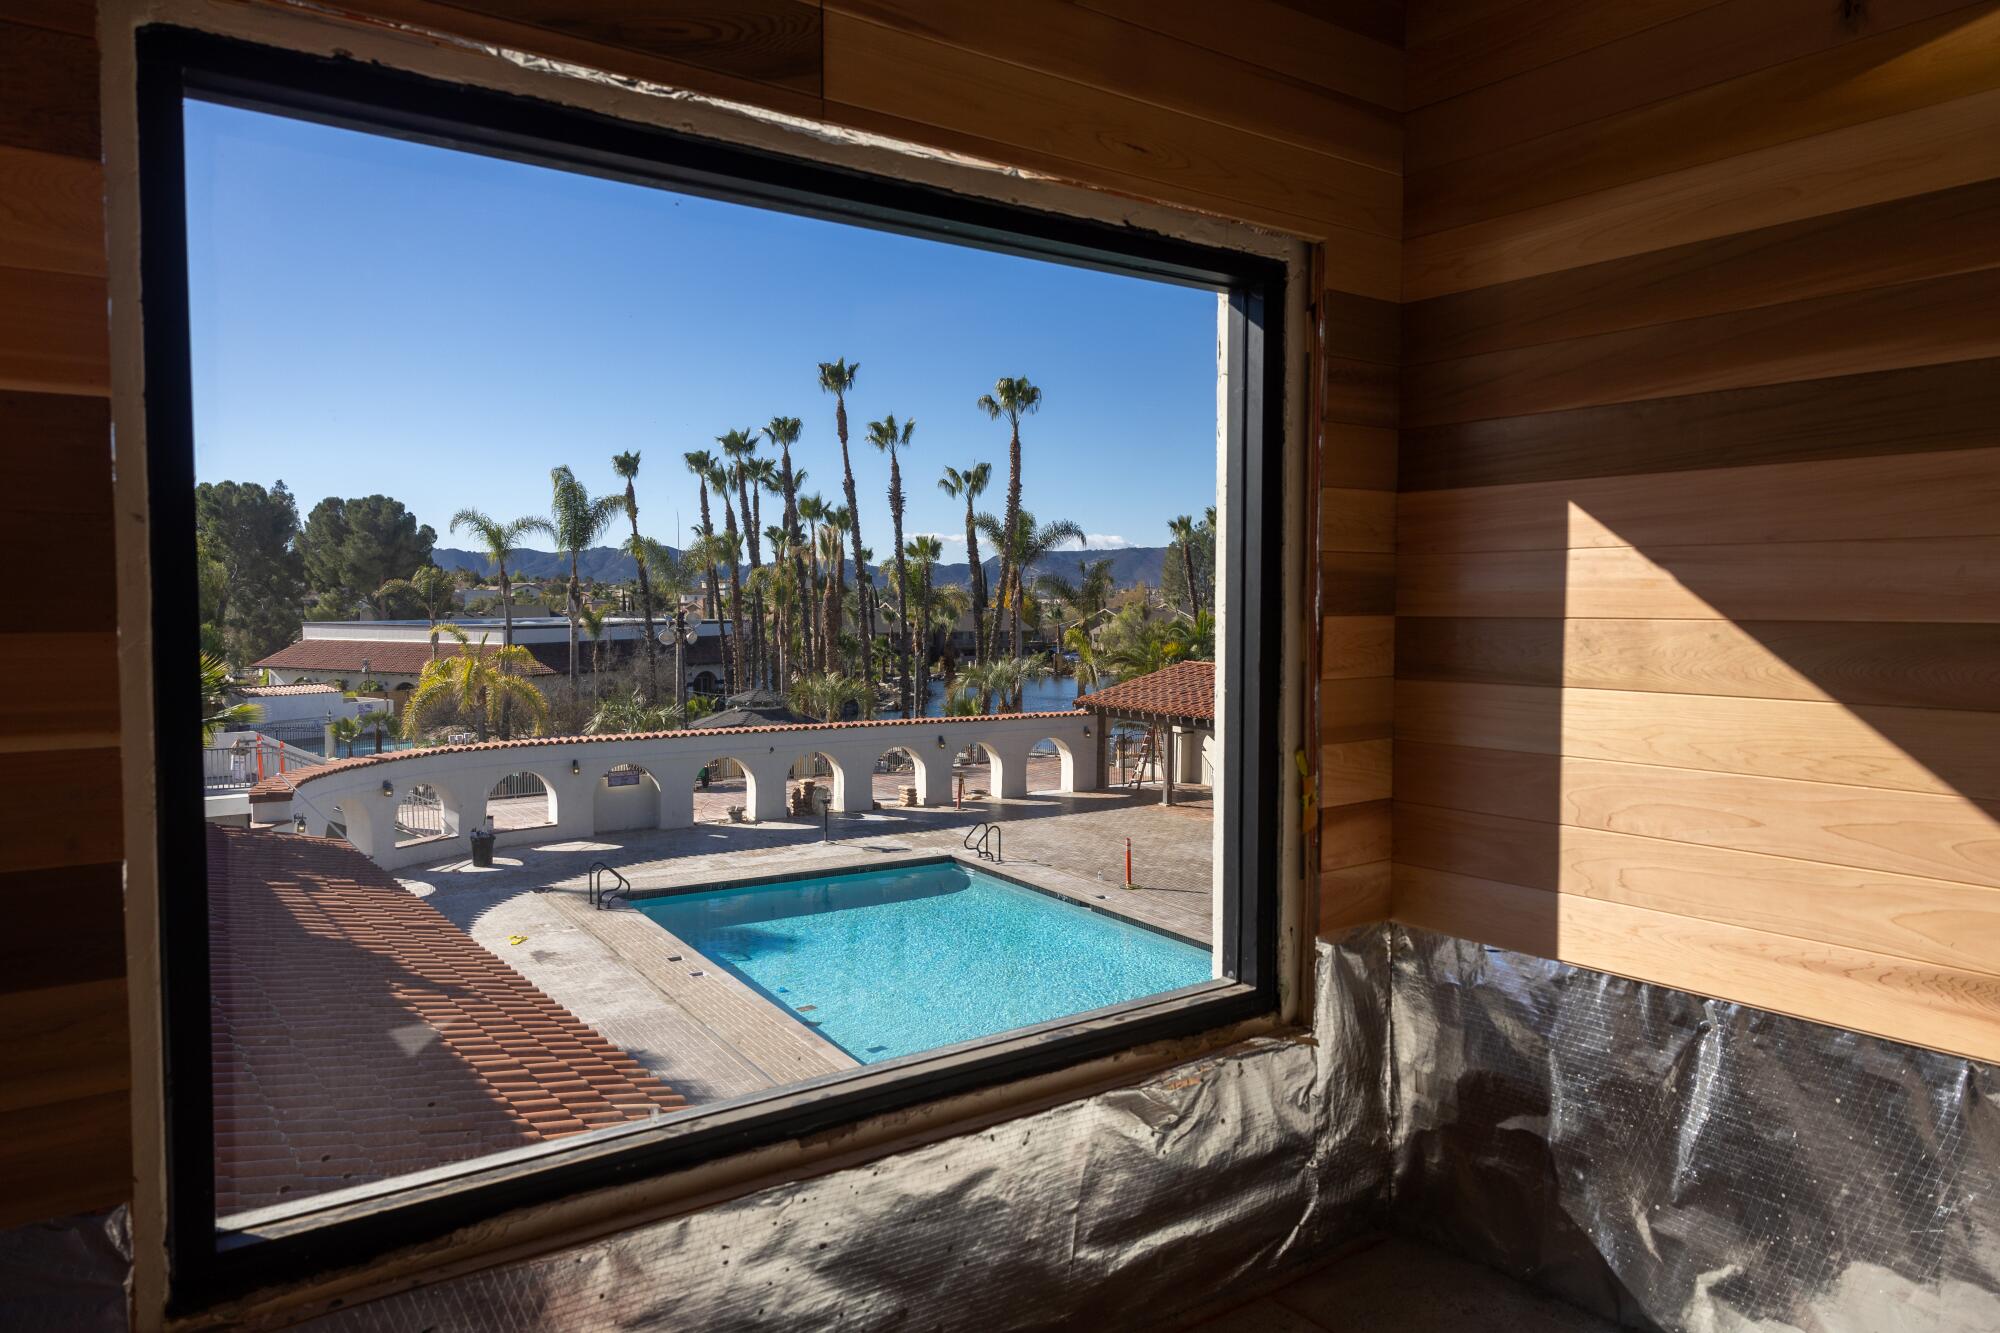 Looking out from a sauna under construction at a pool backed by a line of palm trees.